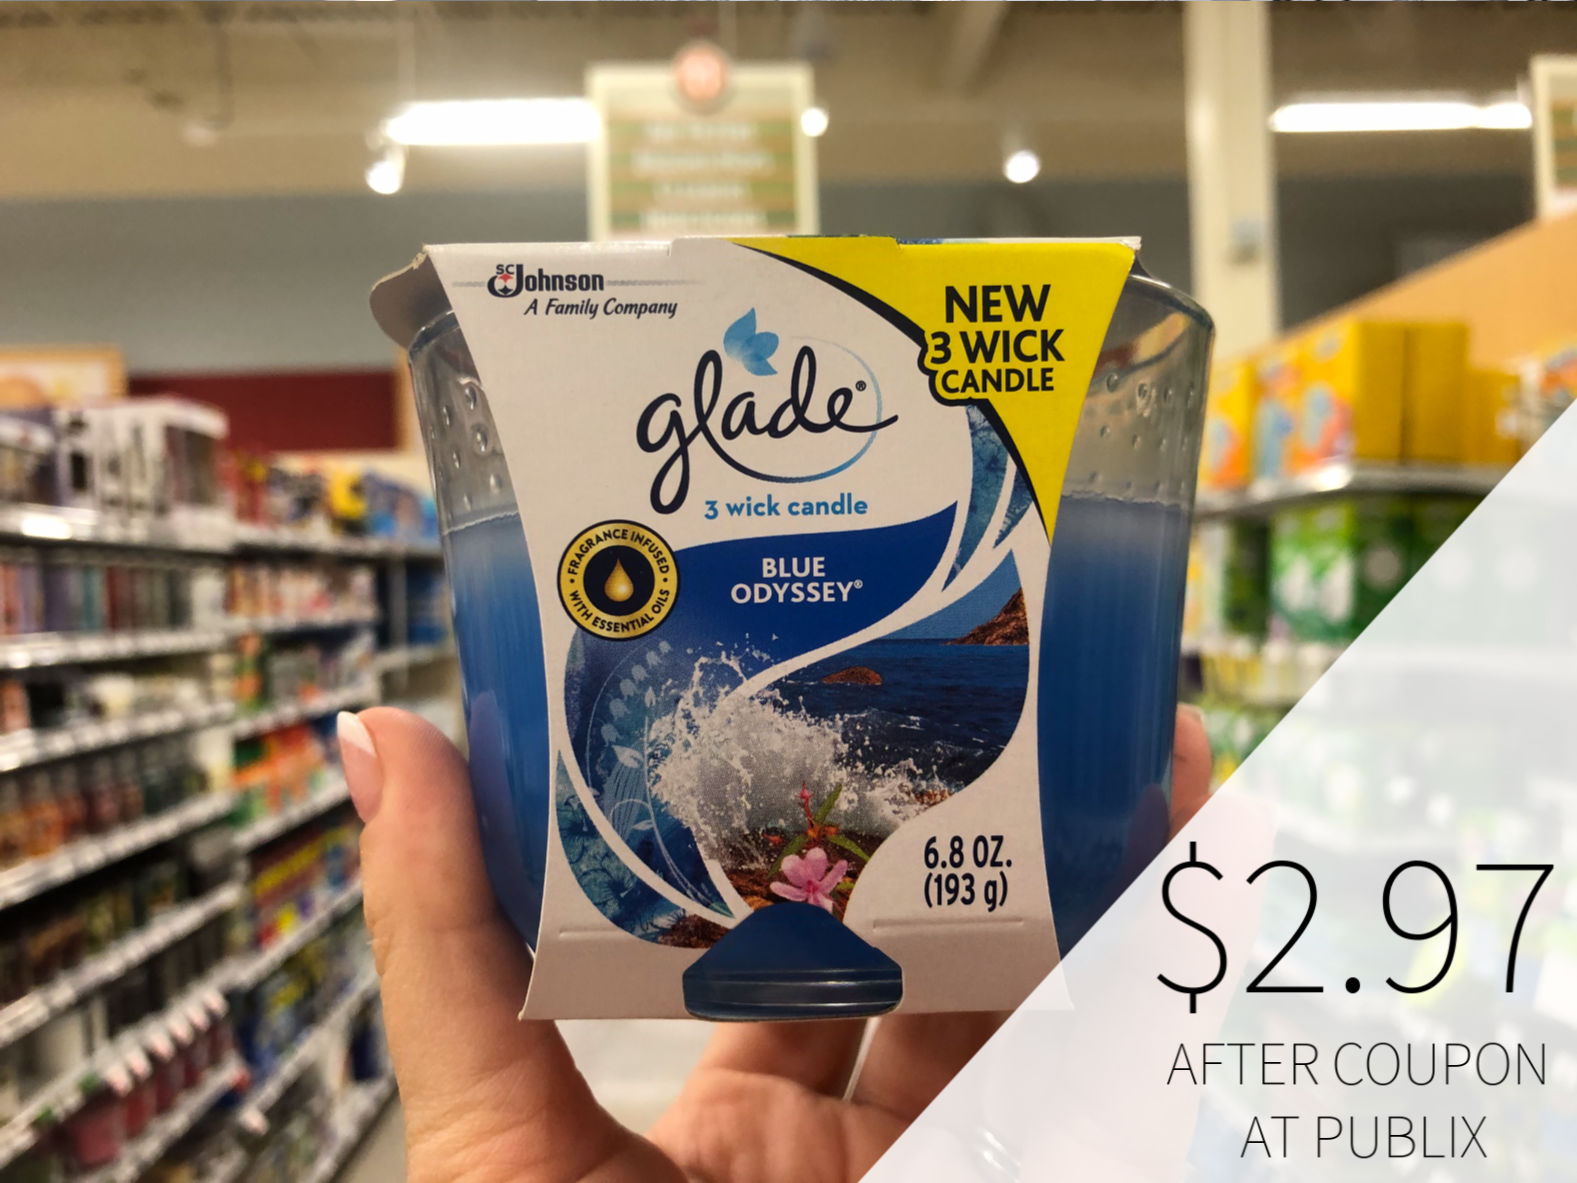 Glade 3-Wick Or Twin Pack Candles Just $2.97 With The Sale & New Coupon! on I Heart Publix 1